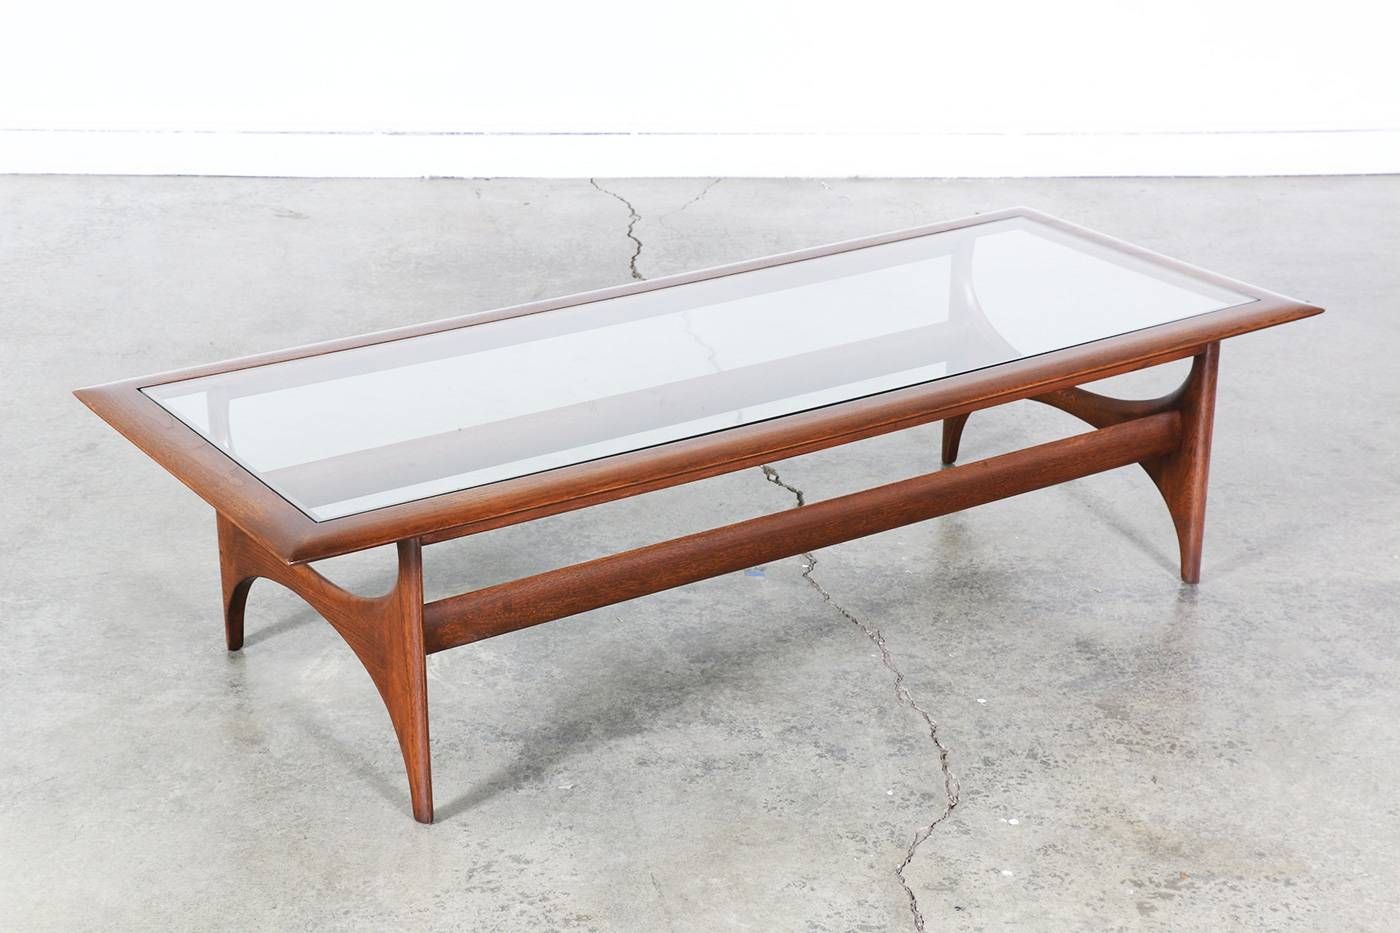 Mid Century Sculptural Coffee Table W/ Glass Toplane | Vintage With Regard To Retro Glass Top Coffee Tables (View 20 of 30)